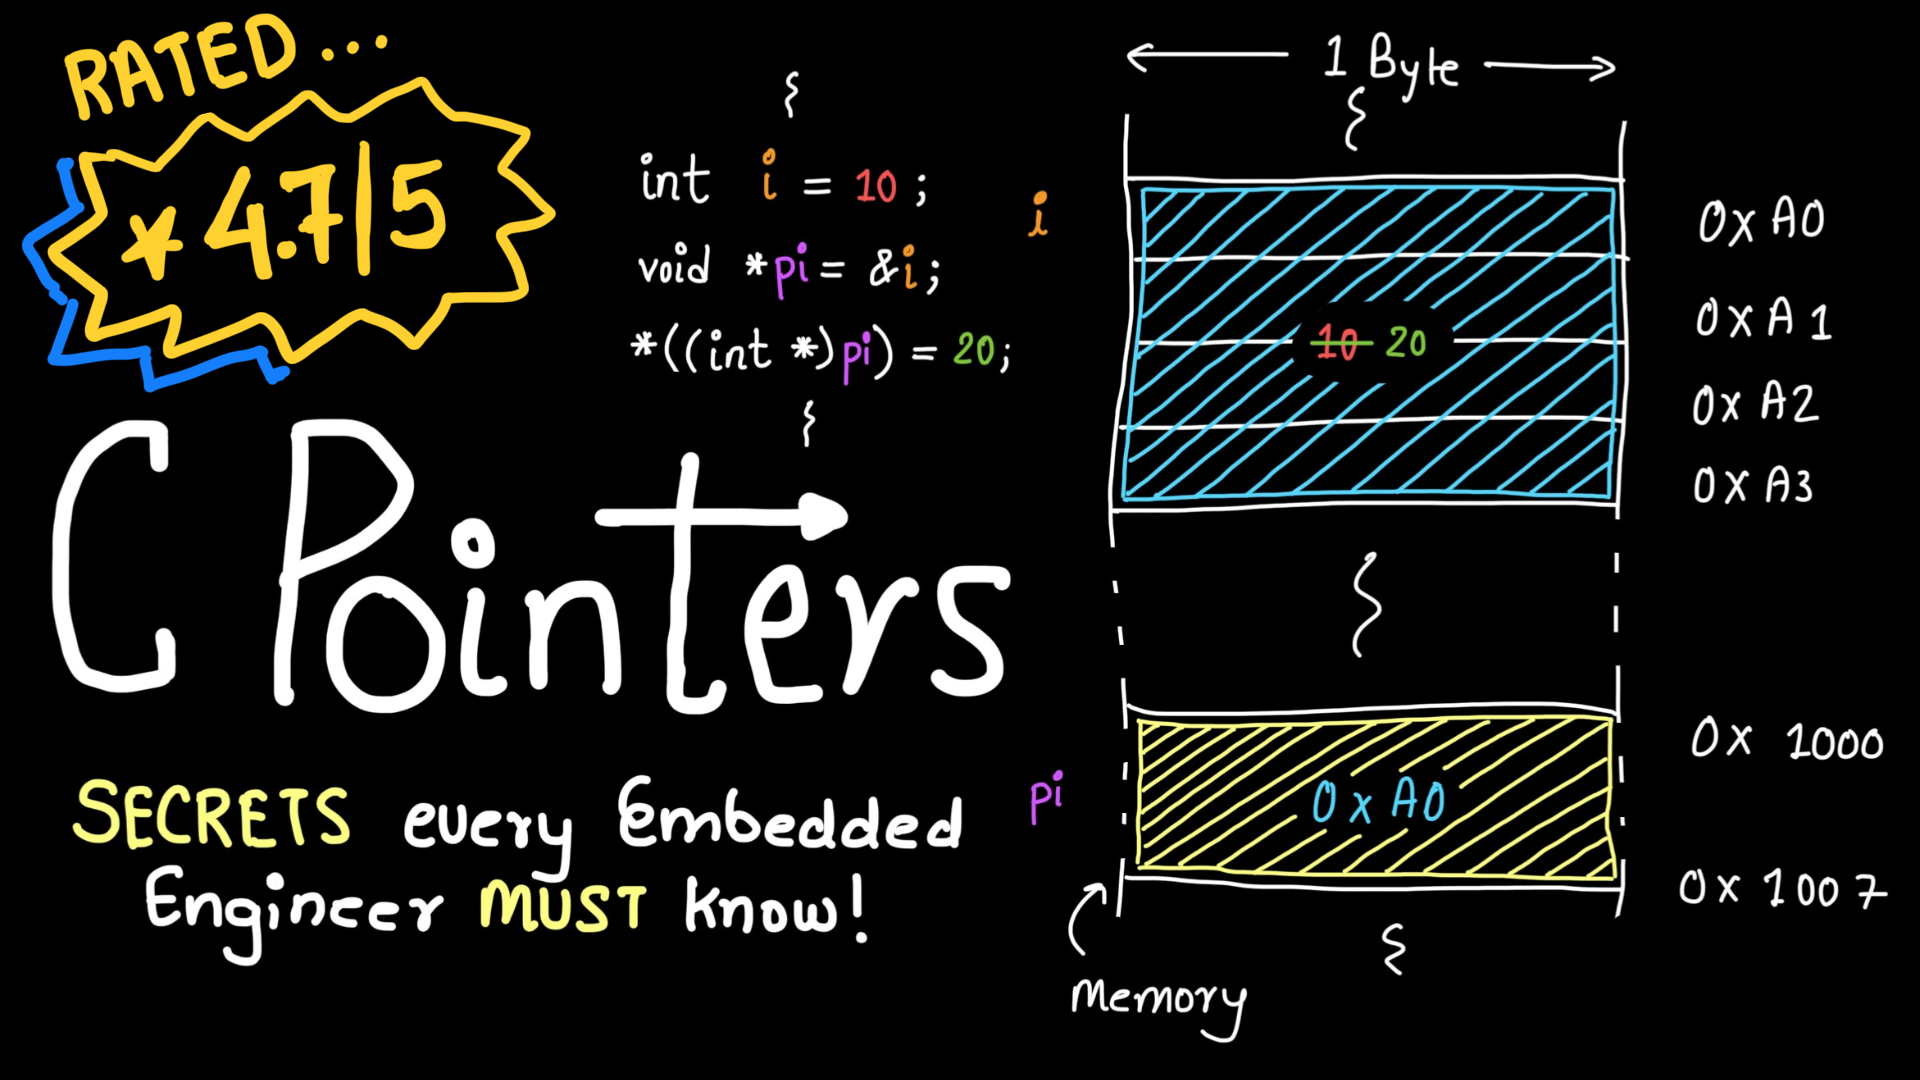 C Pointers: Secrets every Embedded Engineer must know!